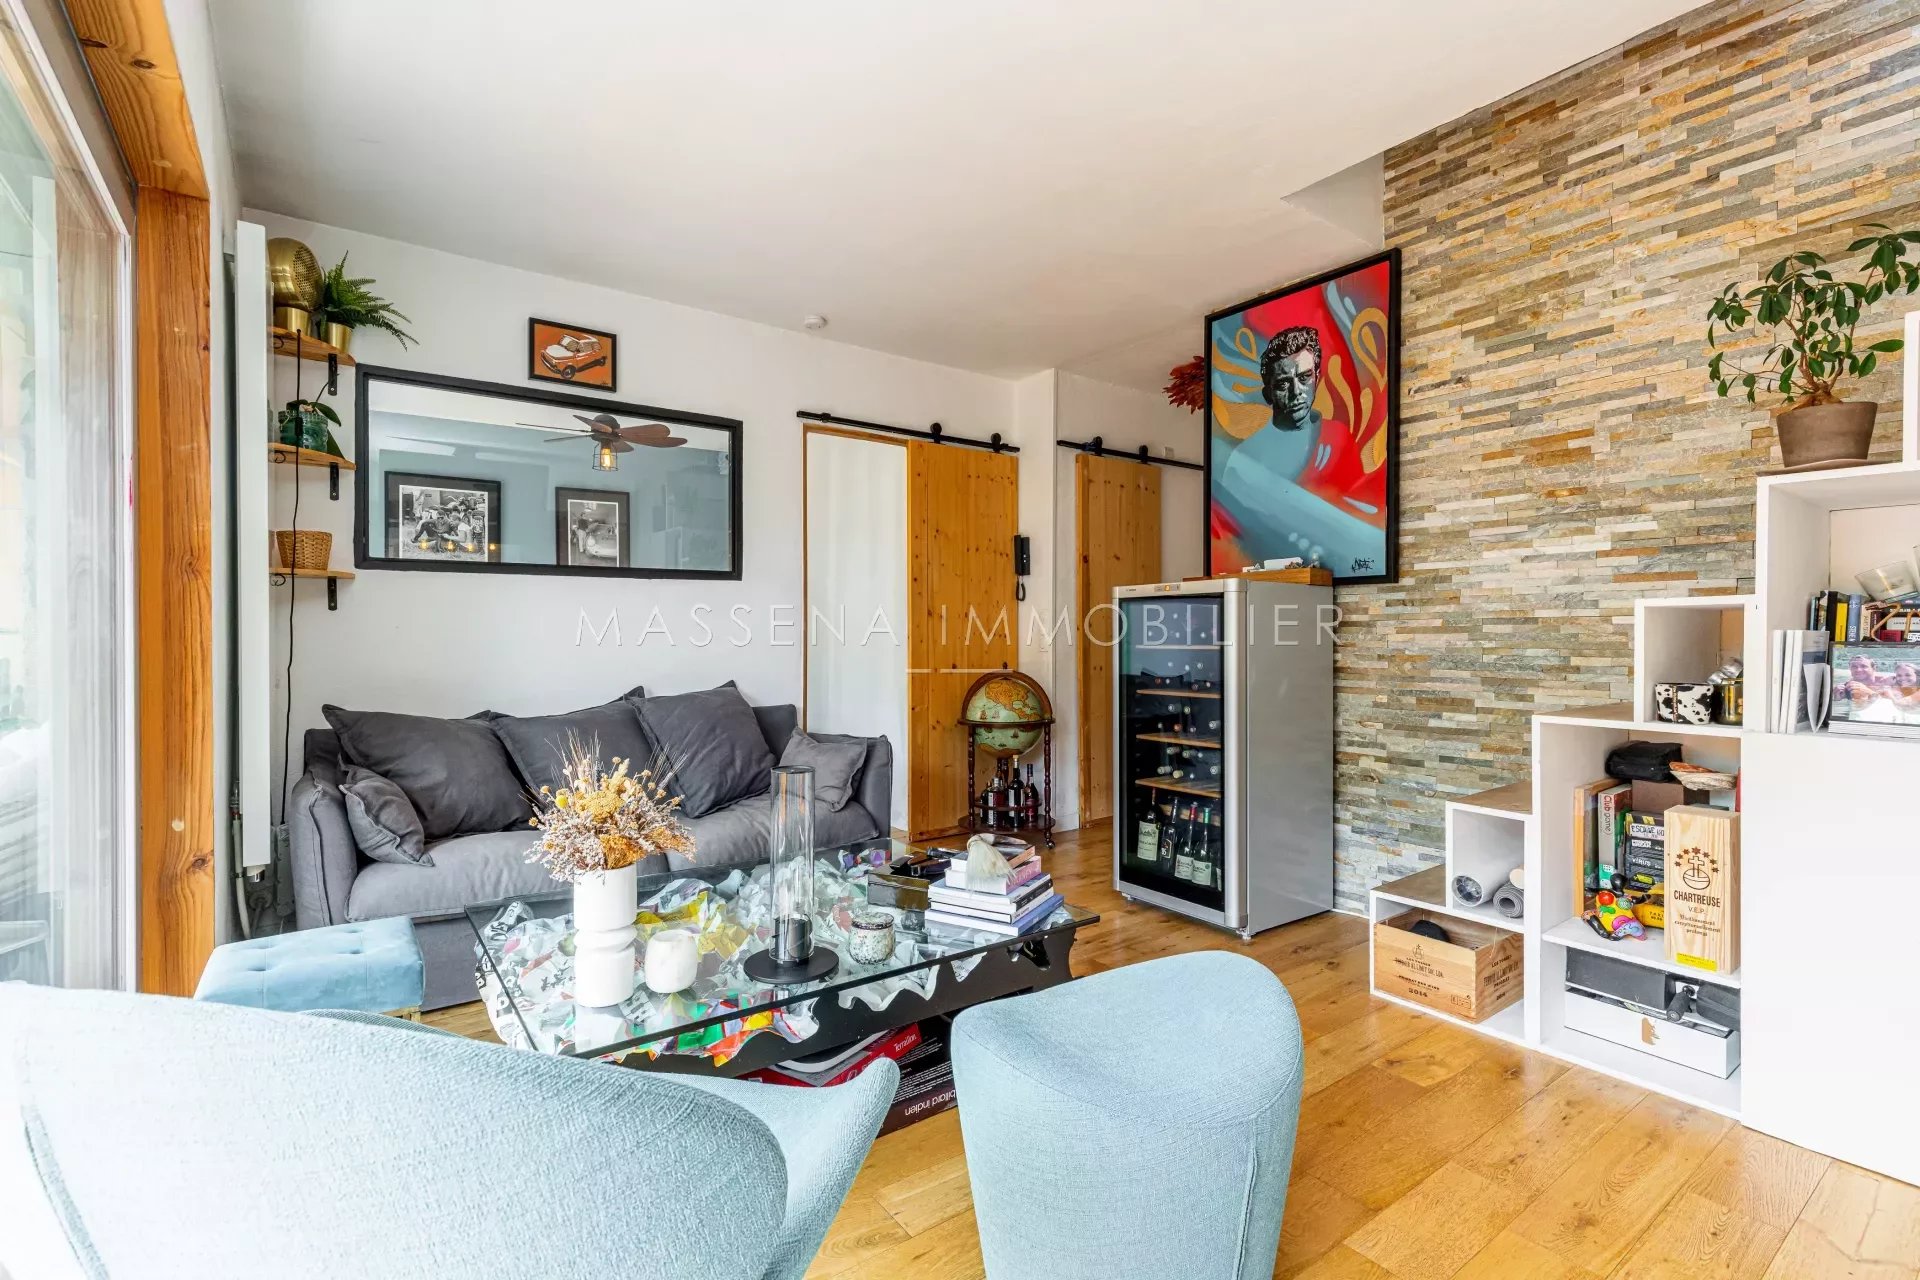 NICE WEST - Amazing one bedroom apartment with terrace garage and cellar